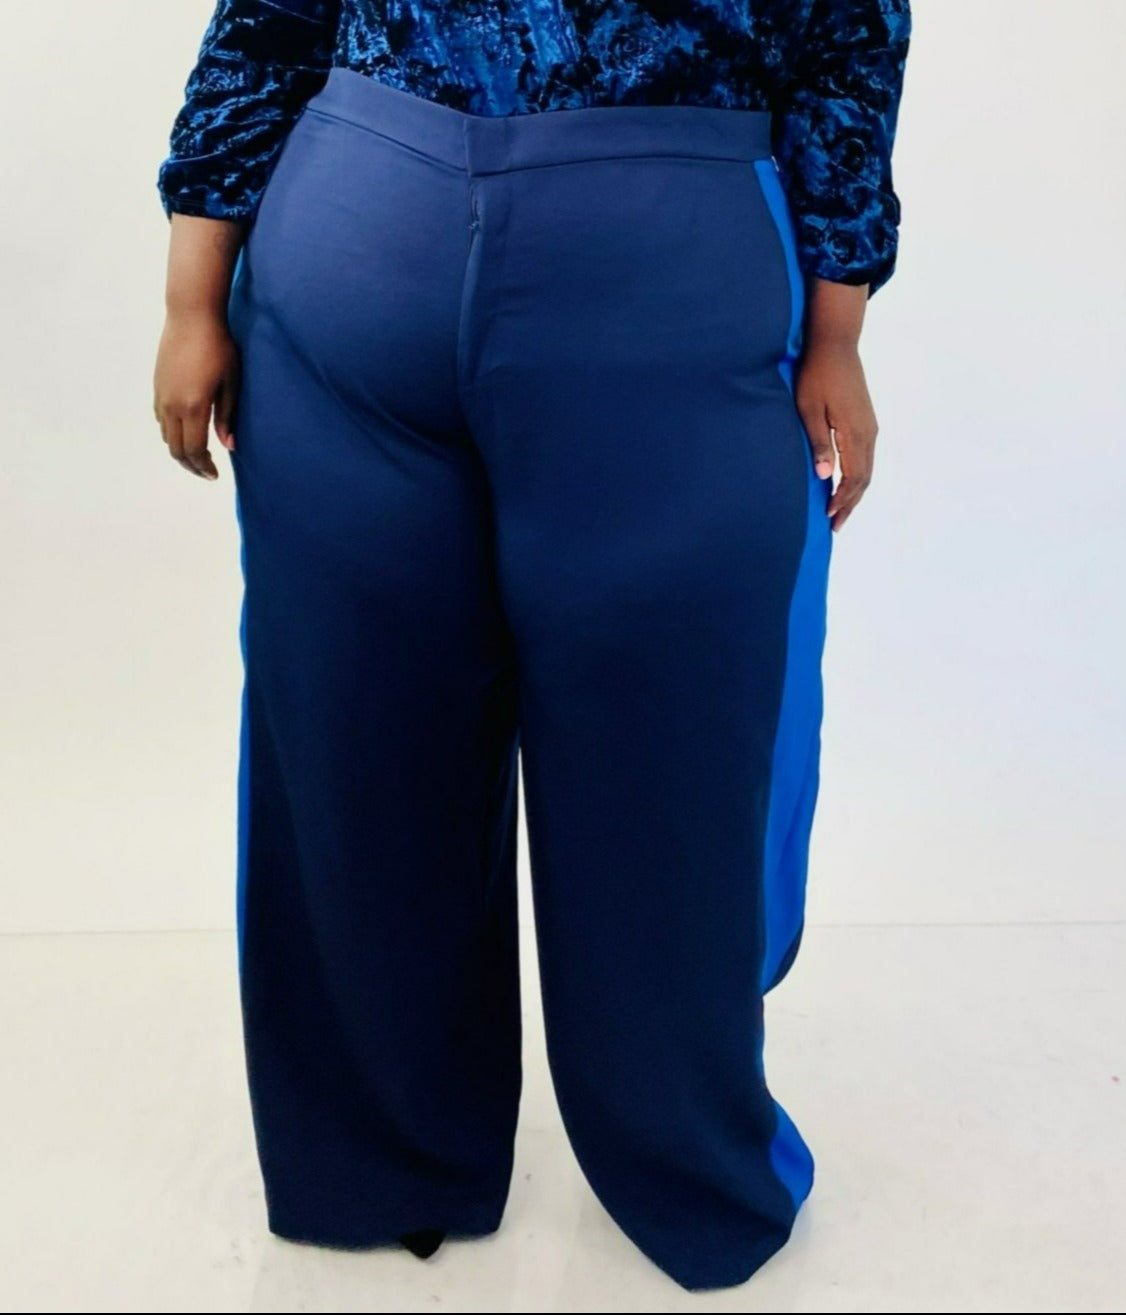 Eloquii Navy Blue Wide Leg Trousers with Light Blue Racing Stripe Side   The Plus Bus Boutique